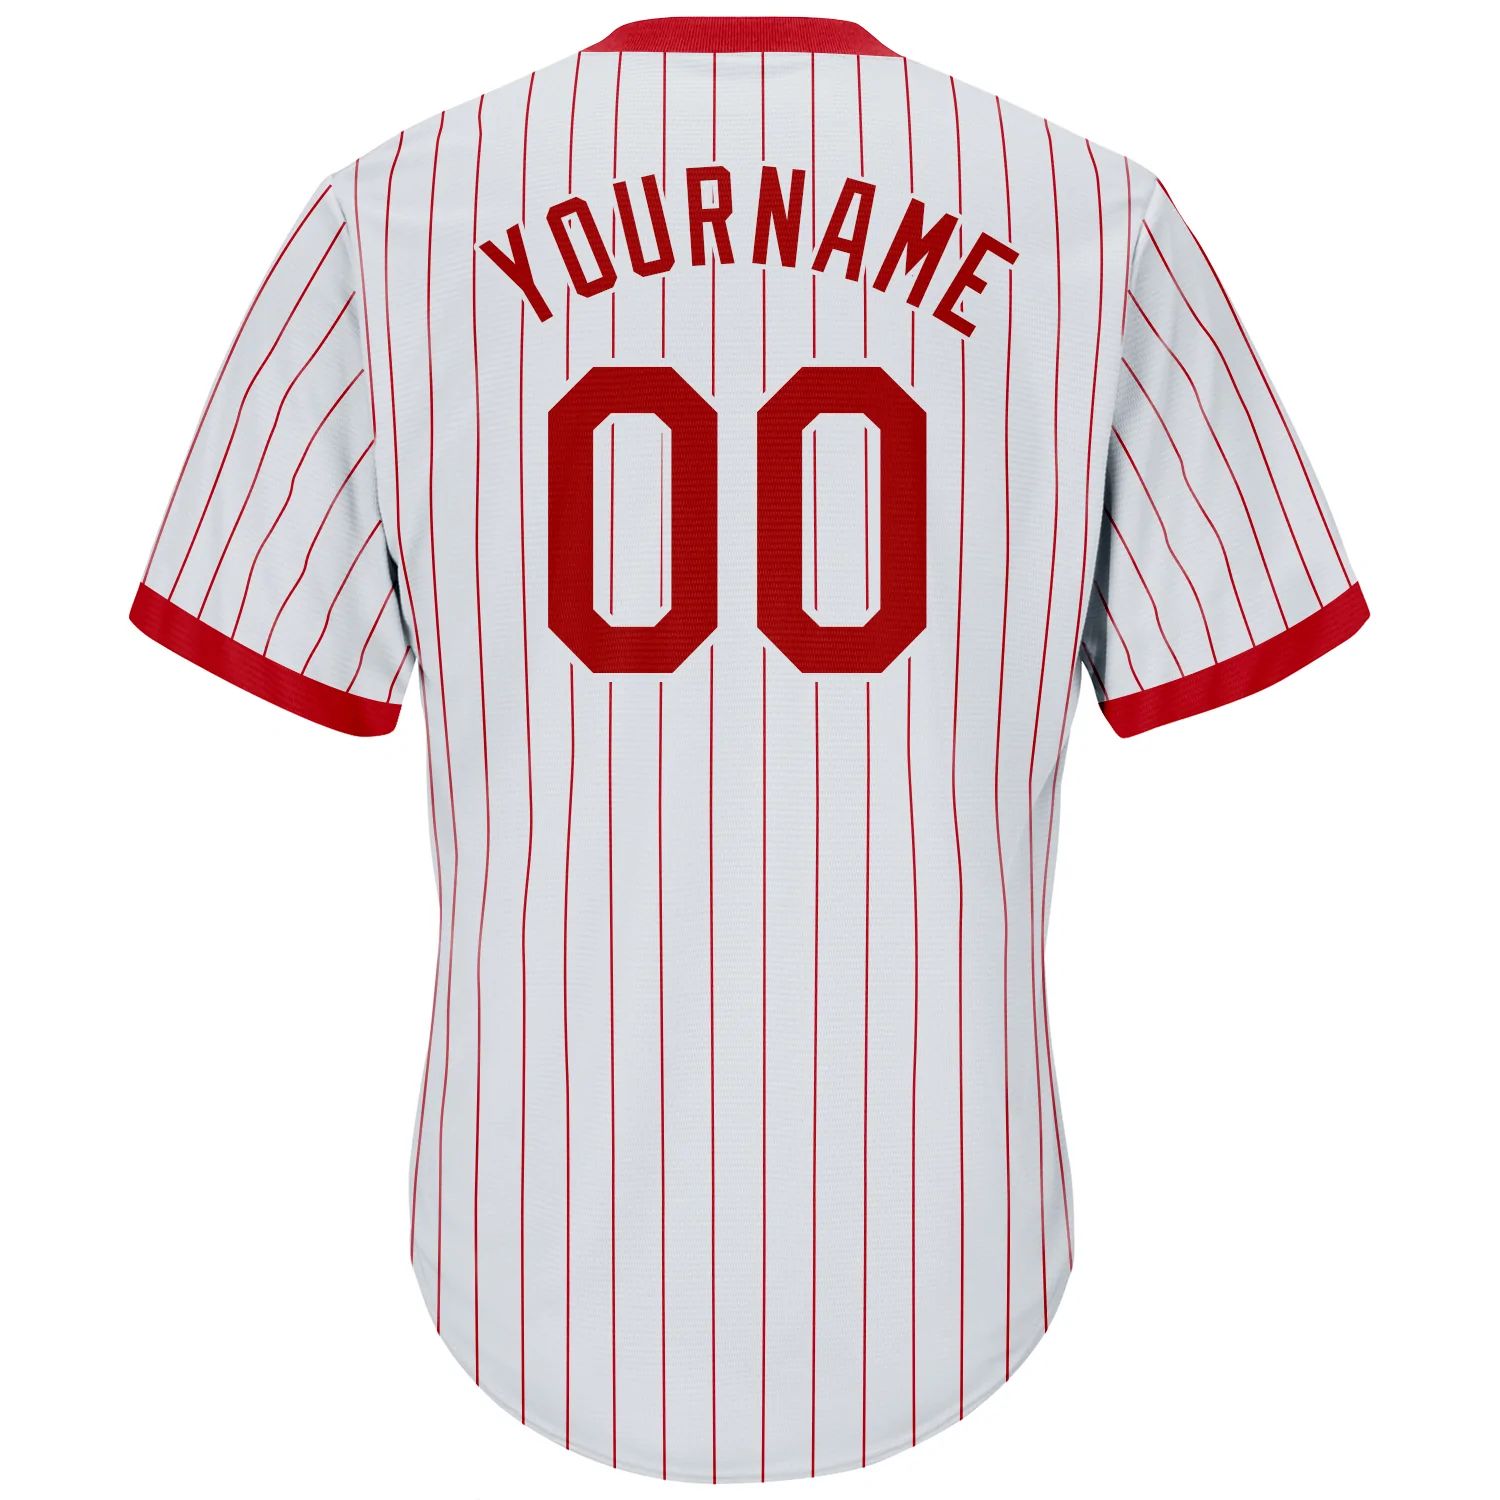 build-white-white-red-strip-baseball-red-jersey-authentic-throwback-ewhite02546-online-3.jpg